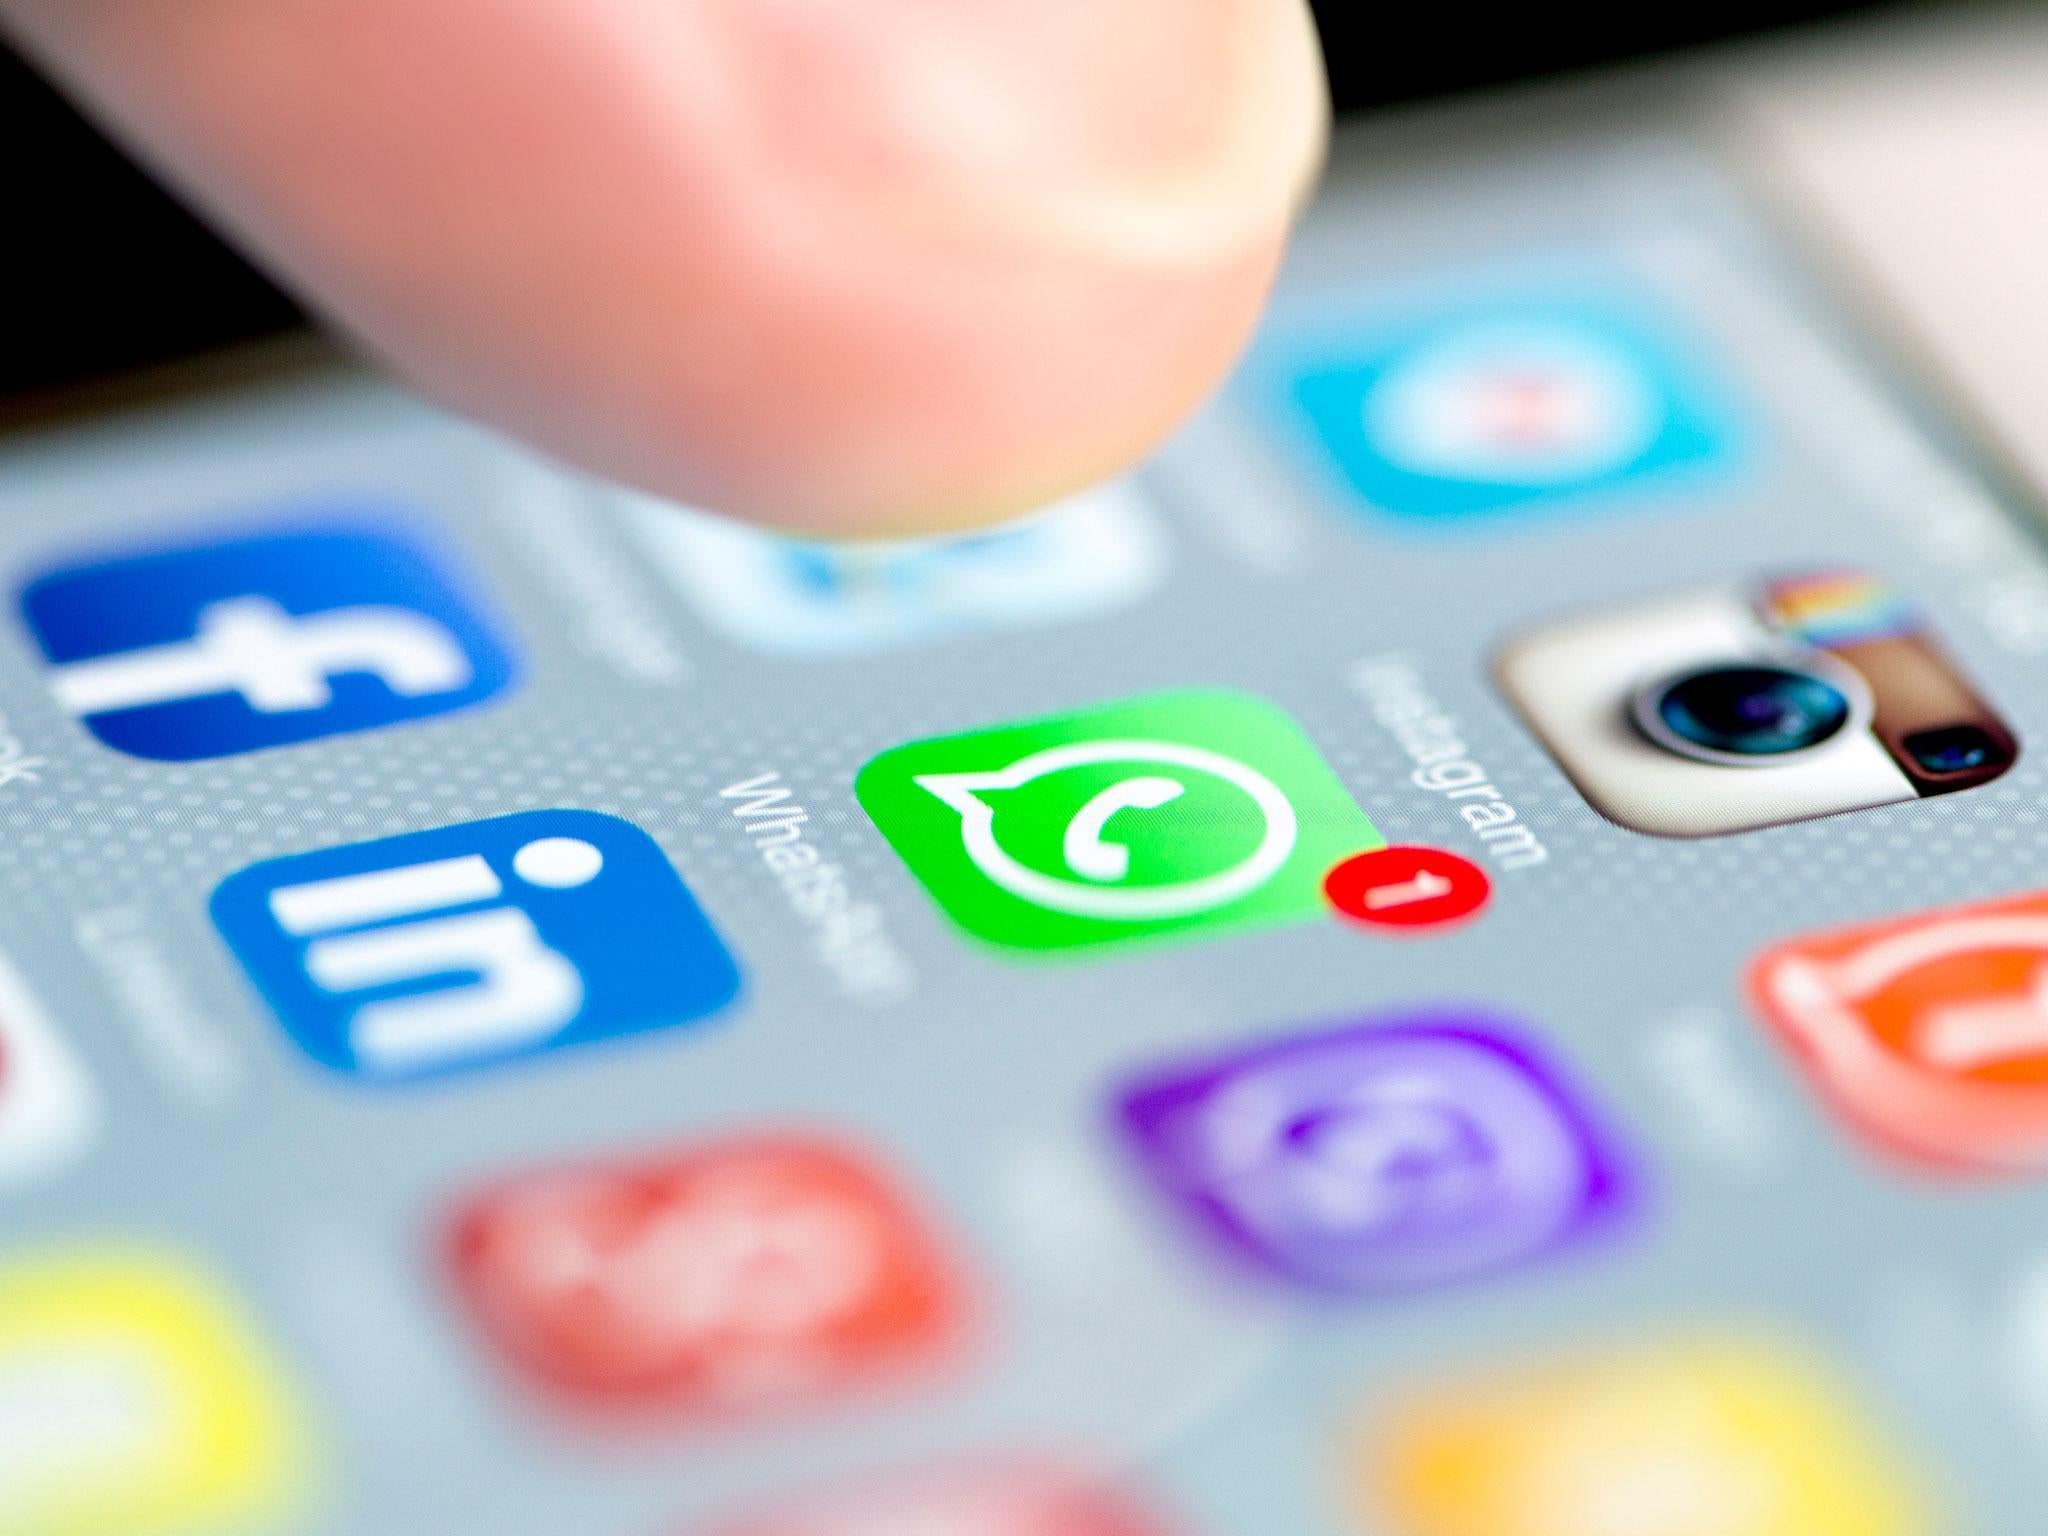 The claim will cause huge concern among WhatsApp users